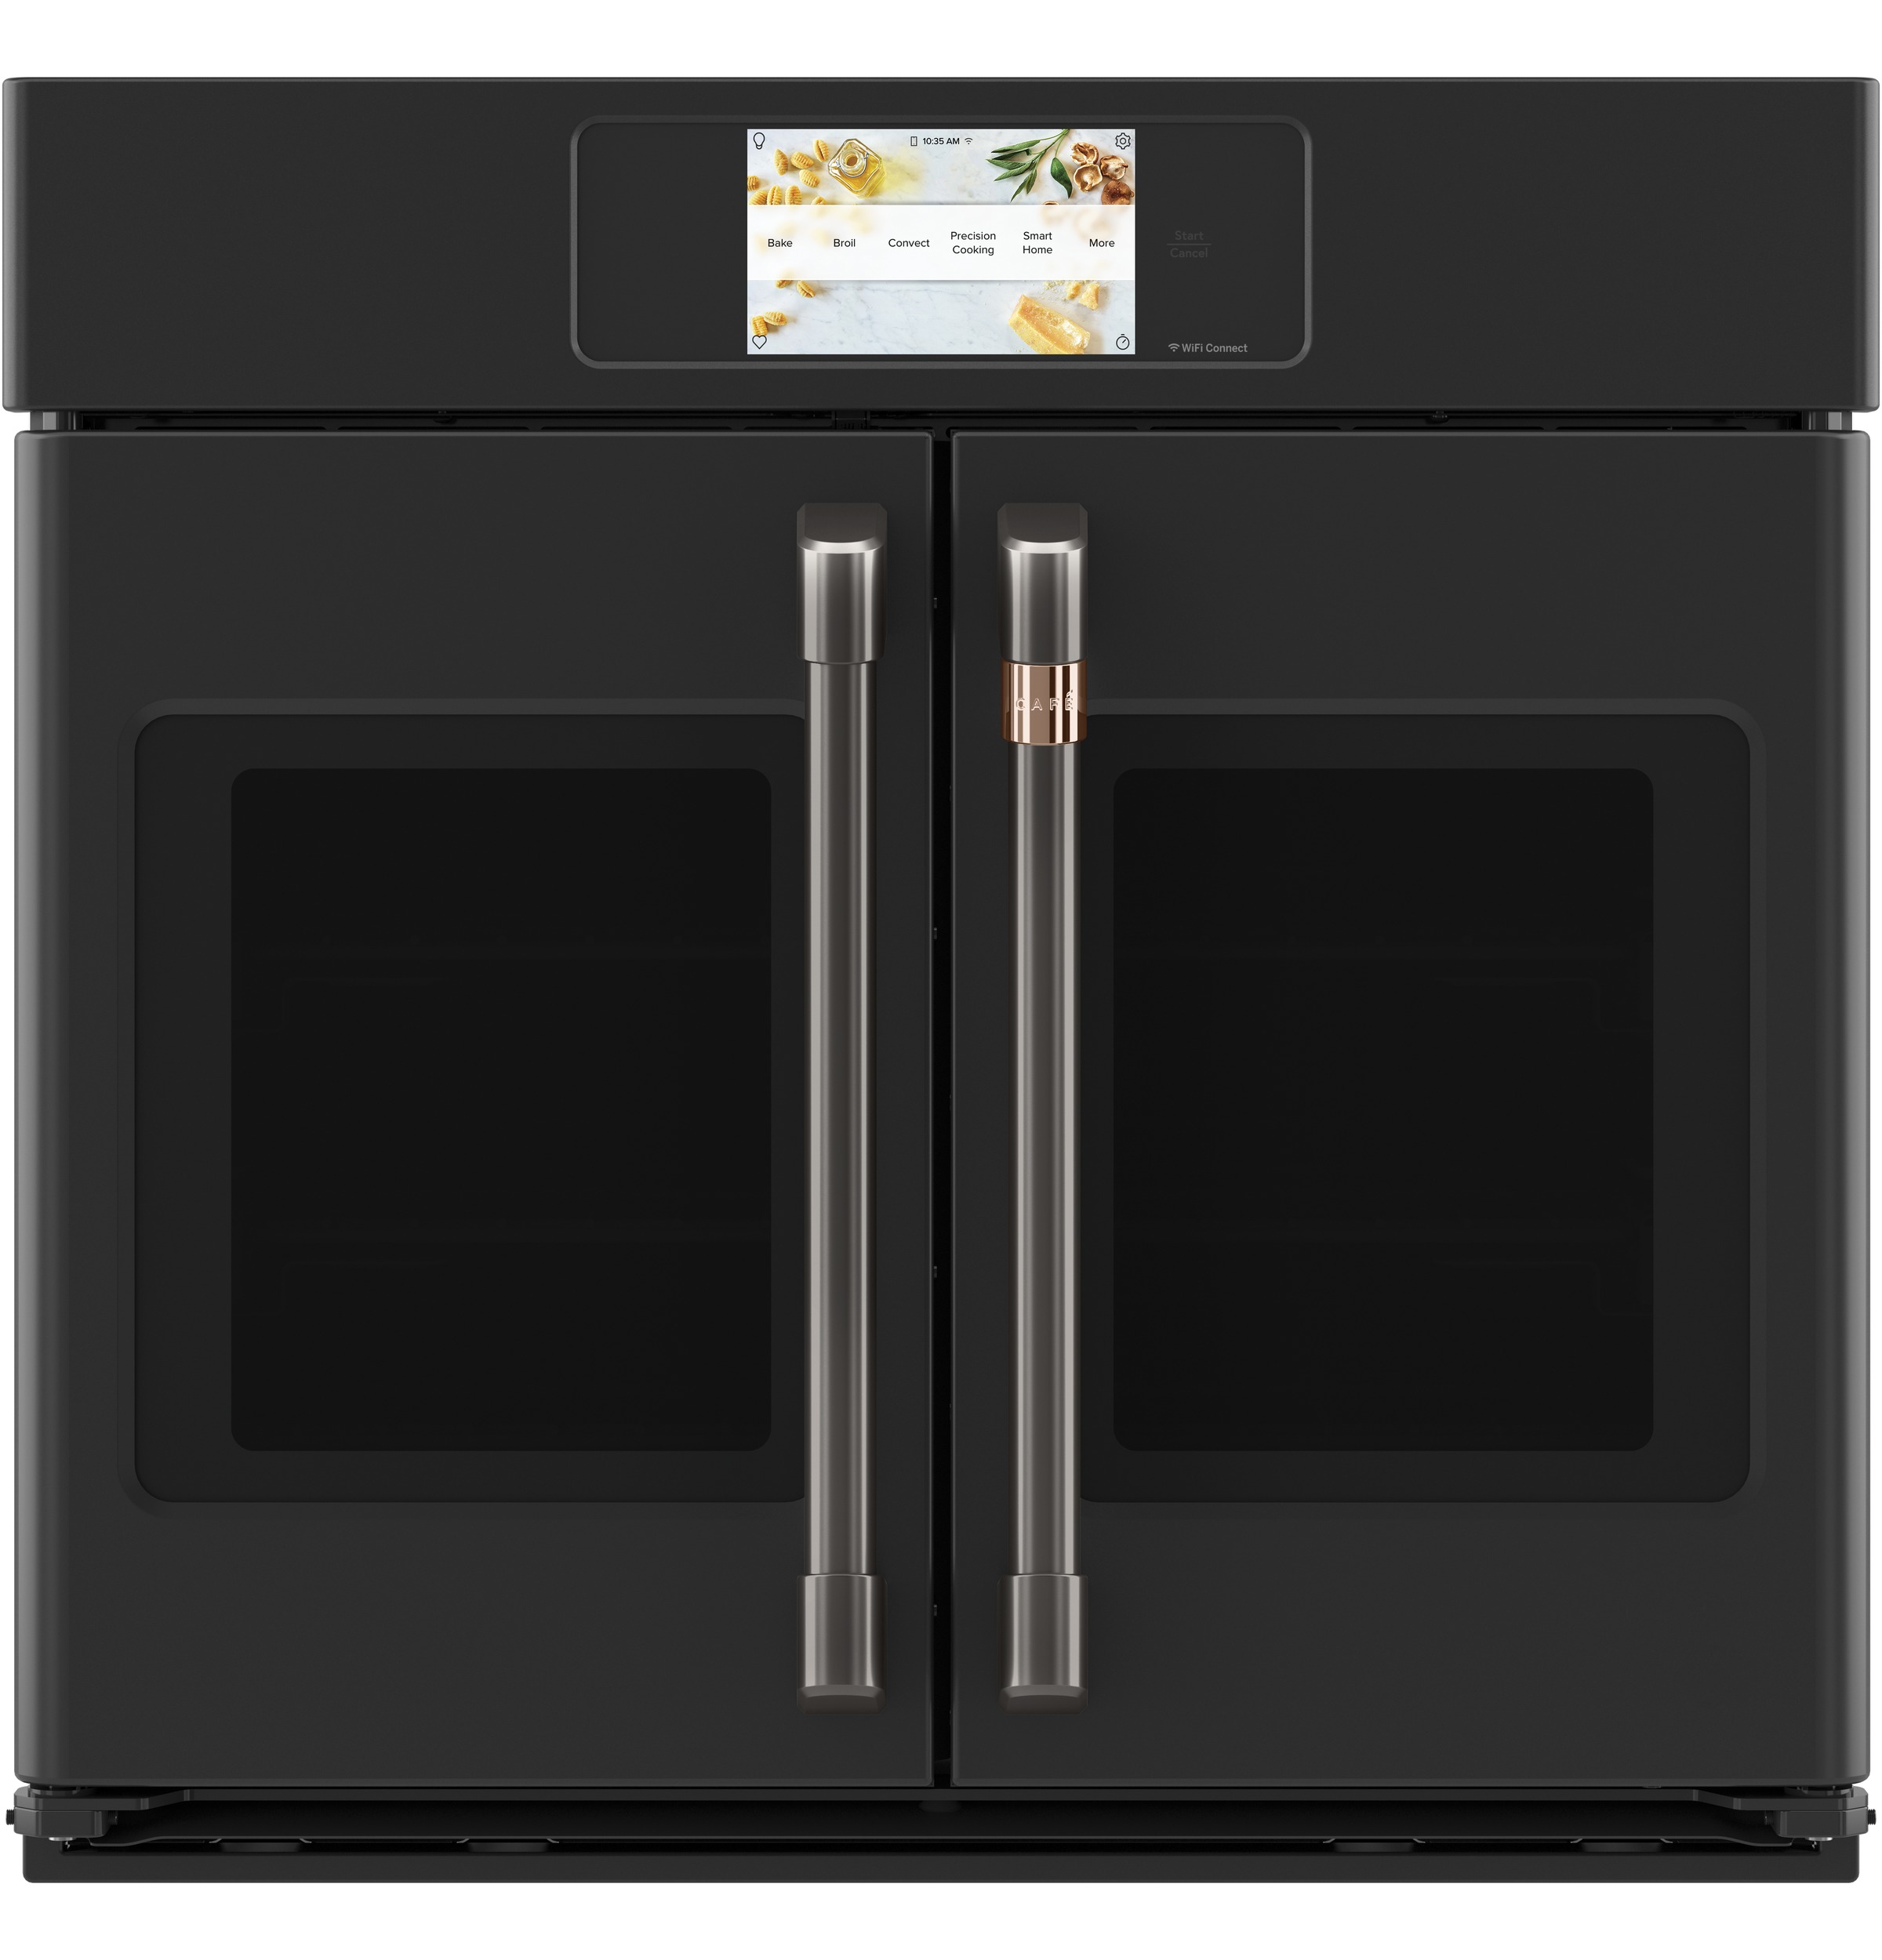 Model: CTS90FP3ND1 | Cafe Café™ Professional Series 30" Smart Built-In Convection French-Door Single Wall Oven